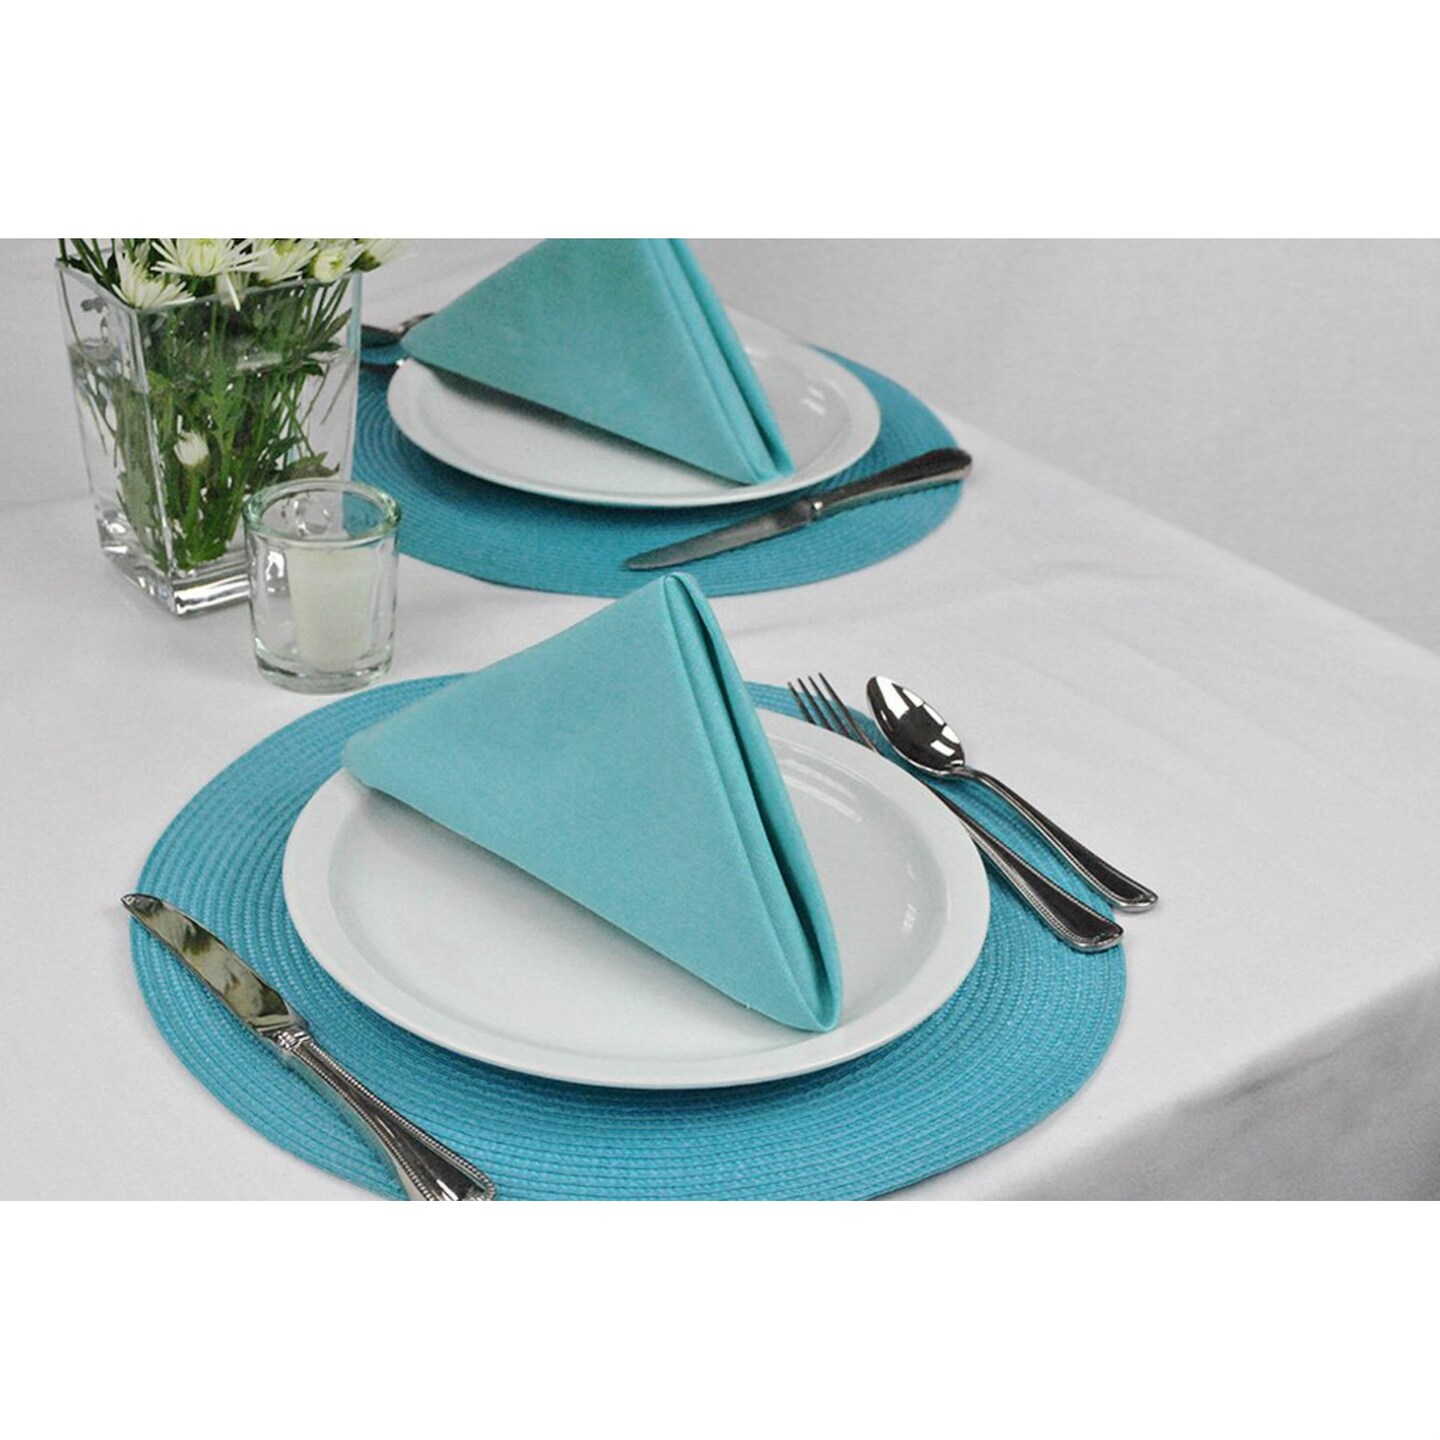 PLACEMAT ROUND PP WOVEN AQUA Set of 6